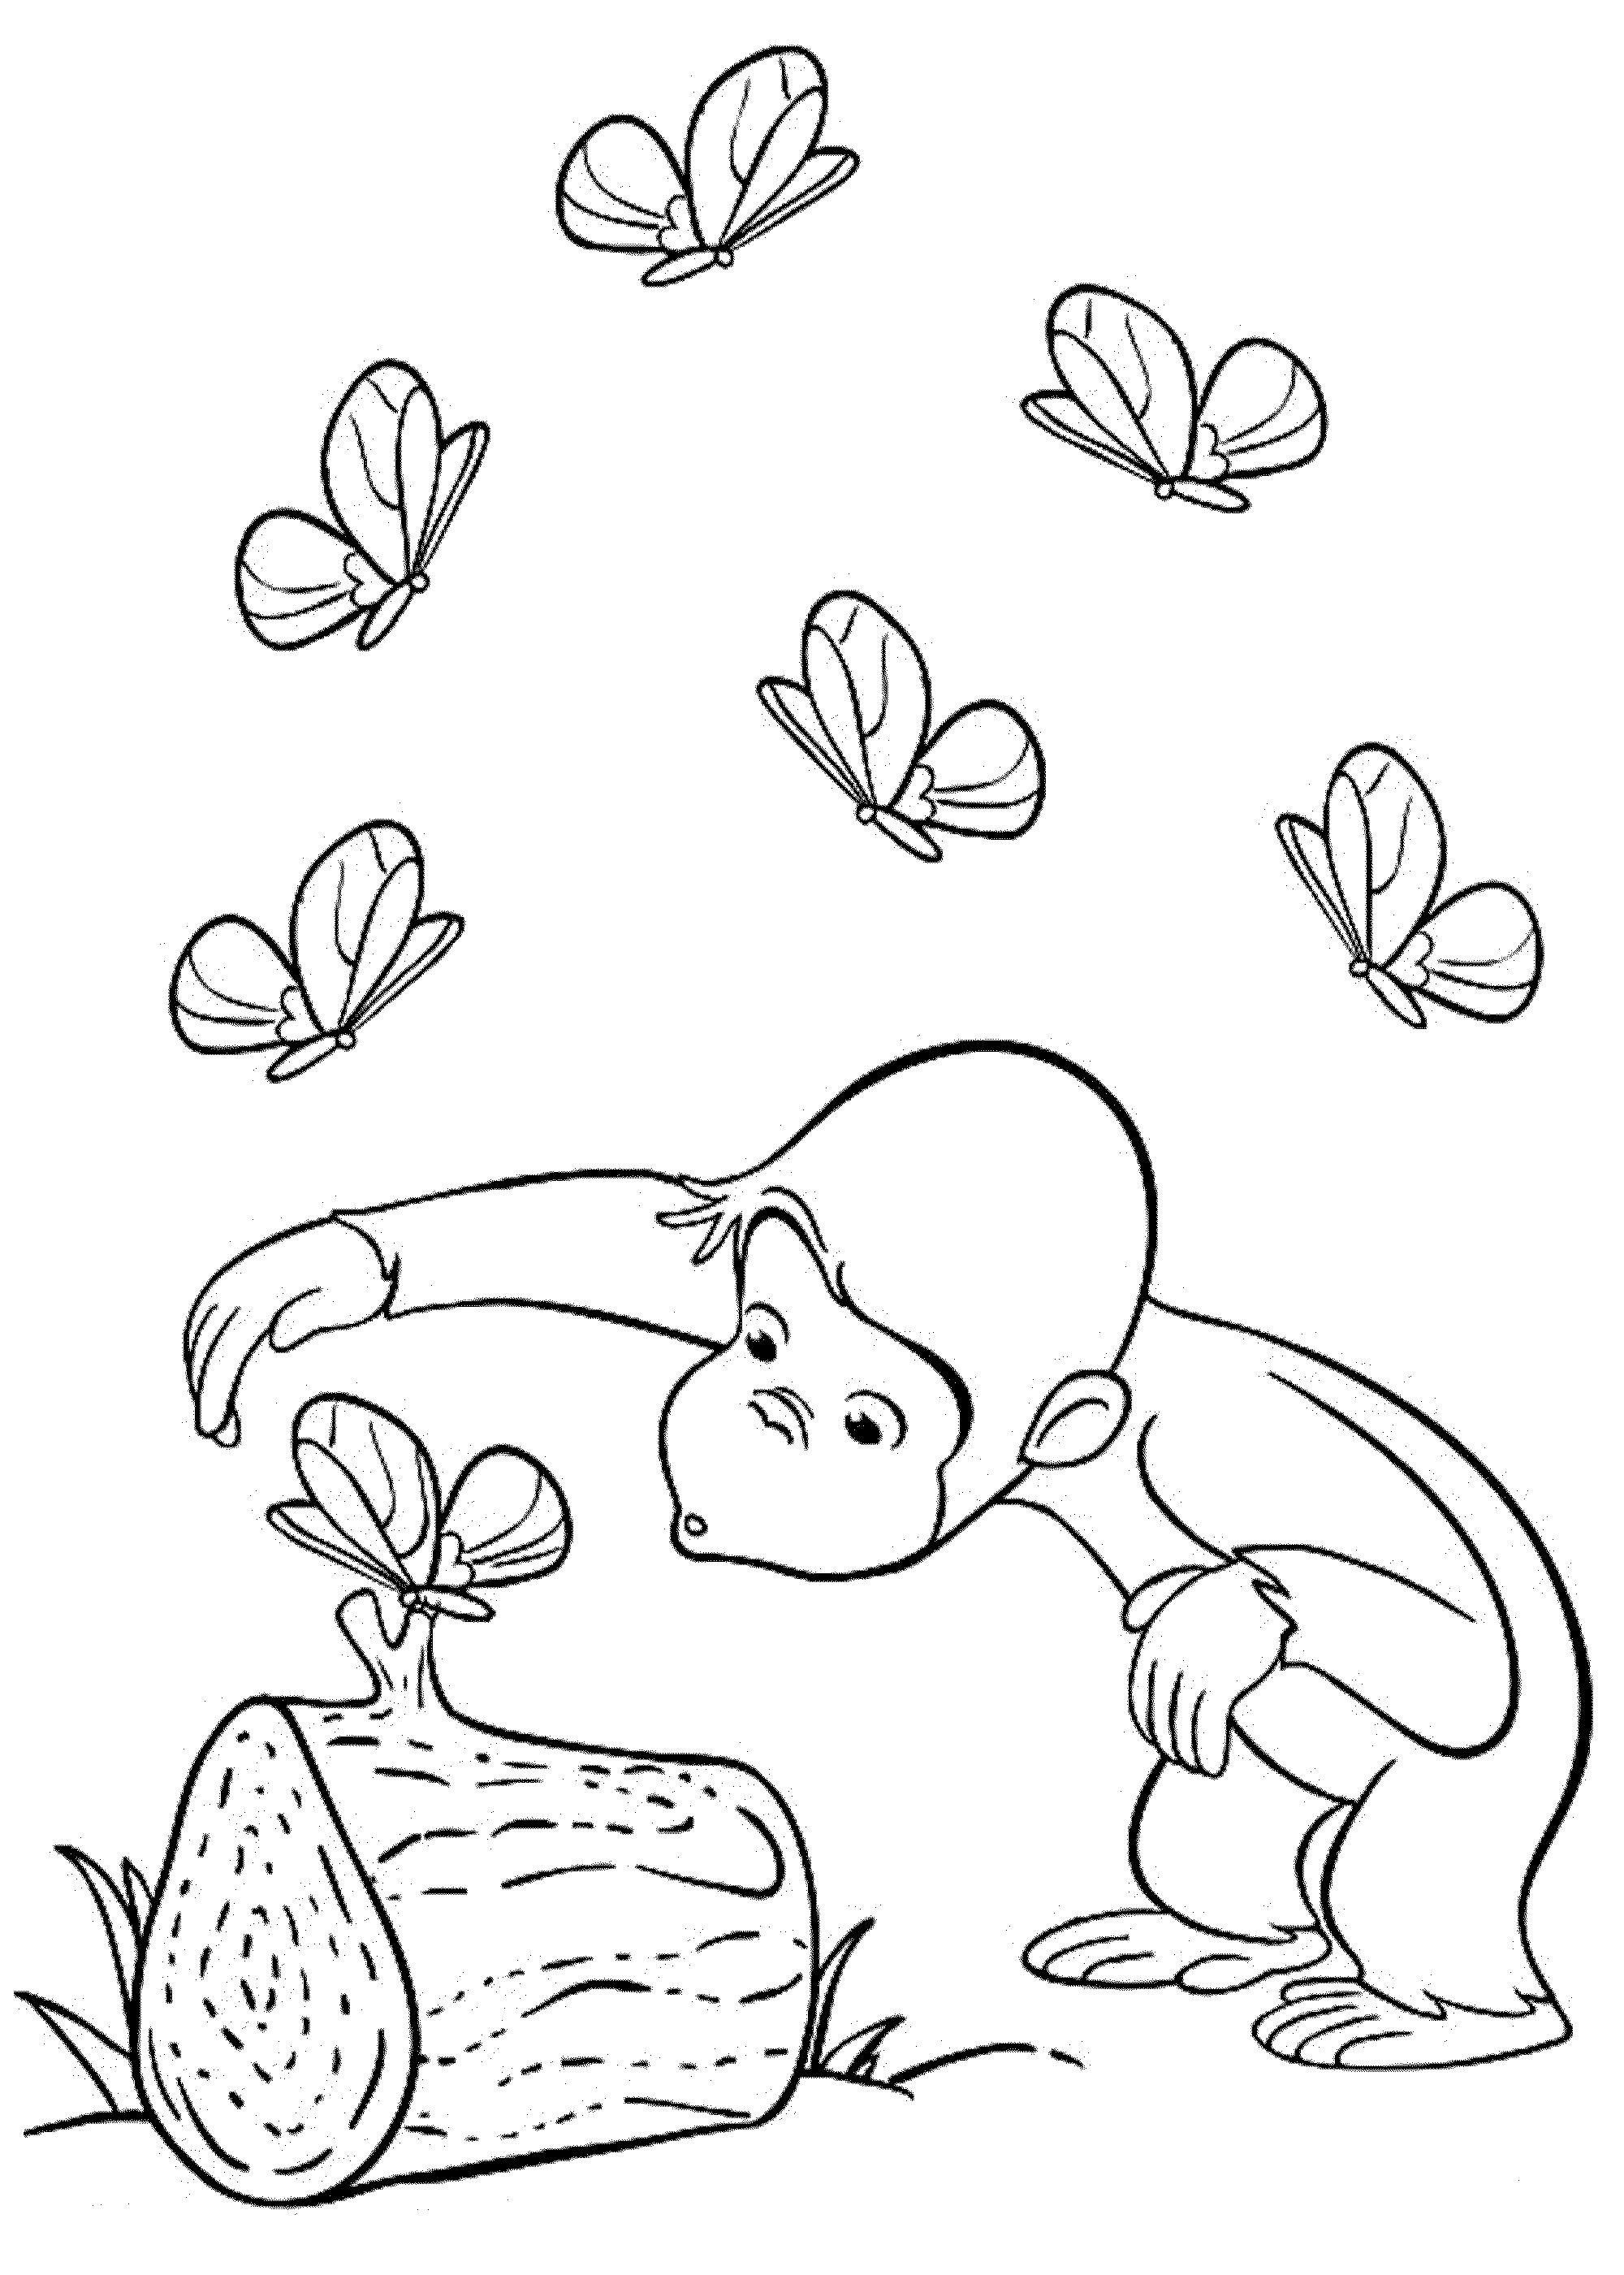 Curious George Coloring Pages - Best Coloring Pages For Kids